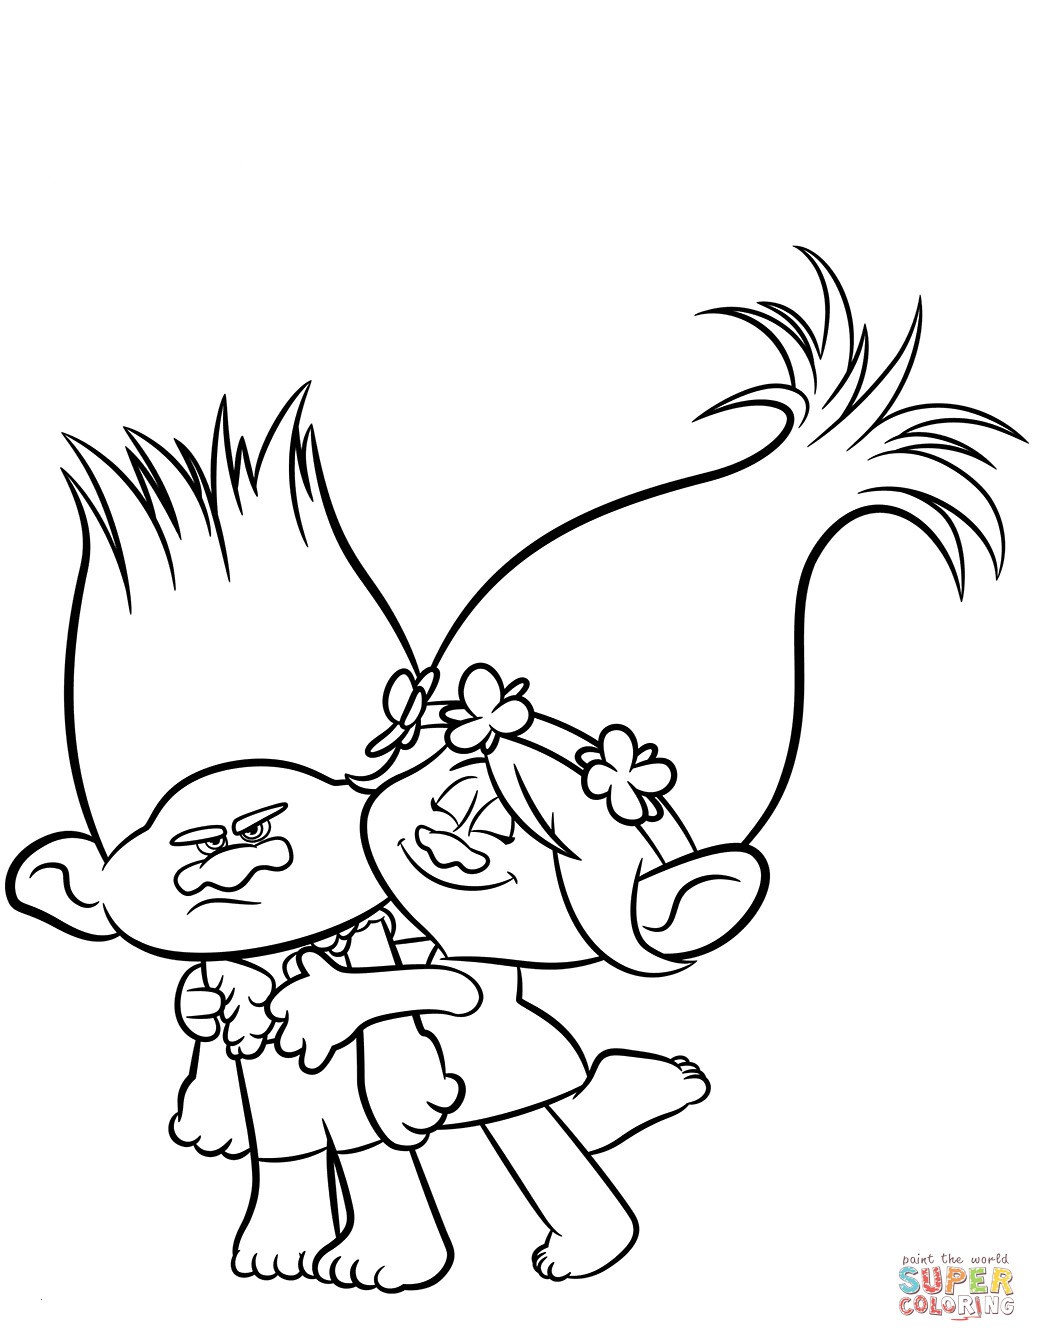 Poppy and Branch Troll Coloring Page Wallpaper